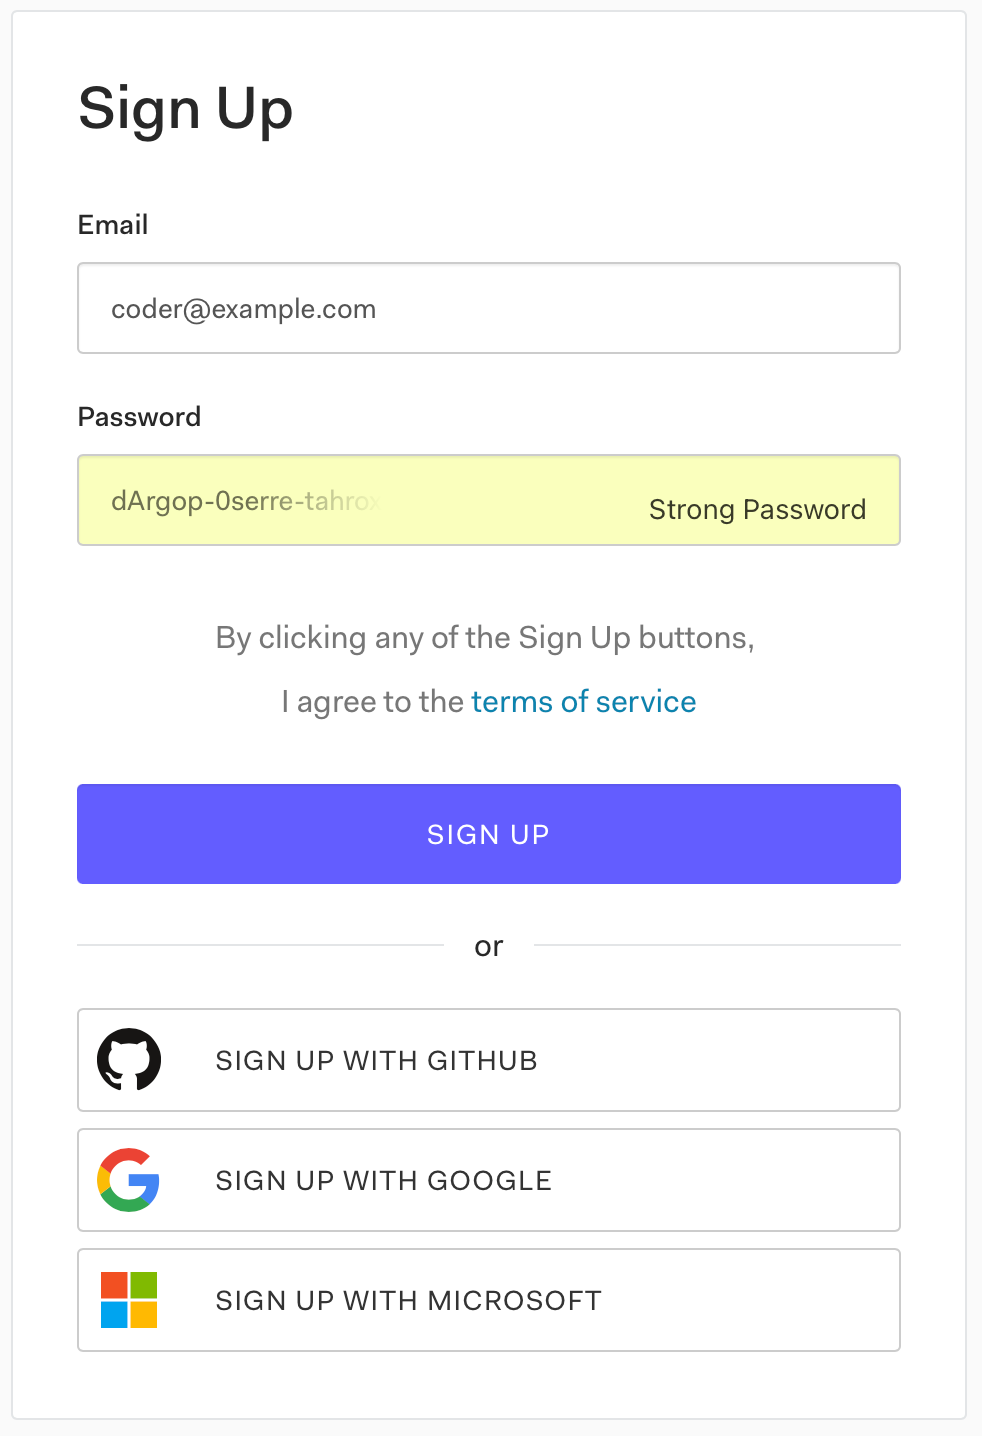 Auth0’s “Sign Up” form, which has “Email” and “Password” fields, and links to sign up with a GitHub, Google, and Microsoft account.